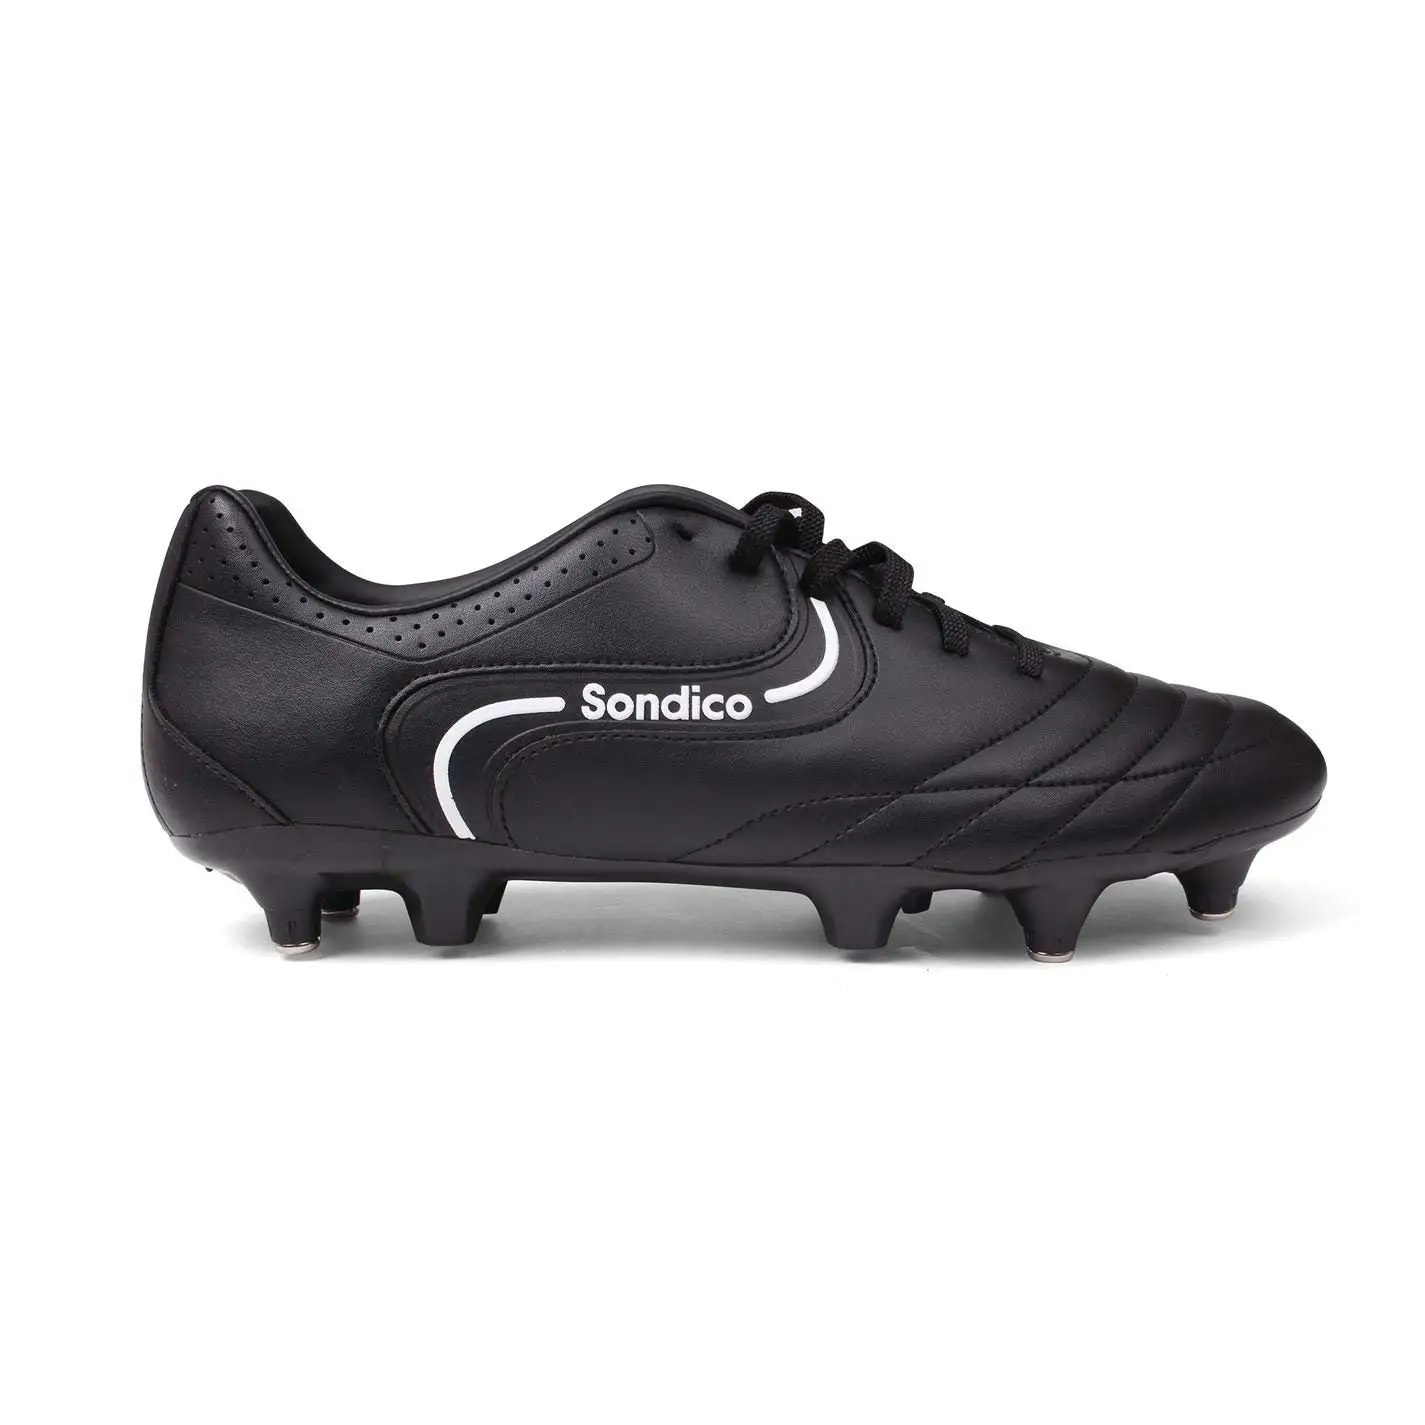 mens sg football boots sale,OFF 73 